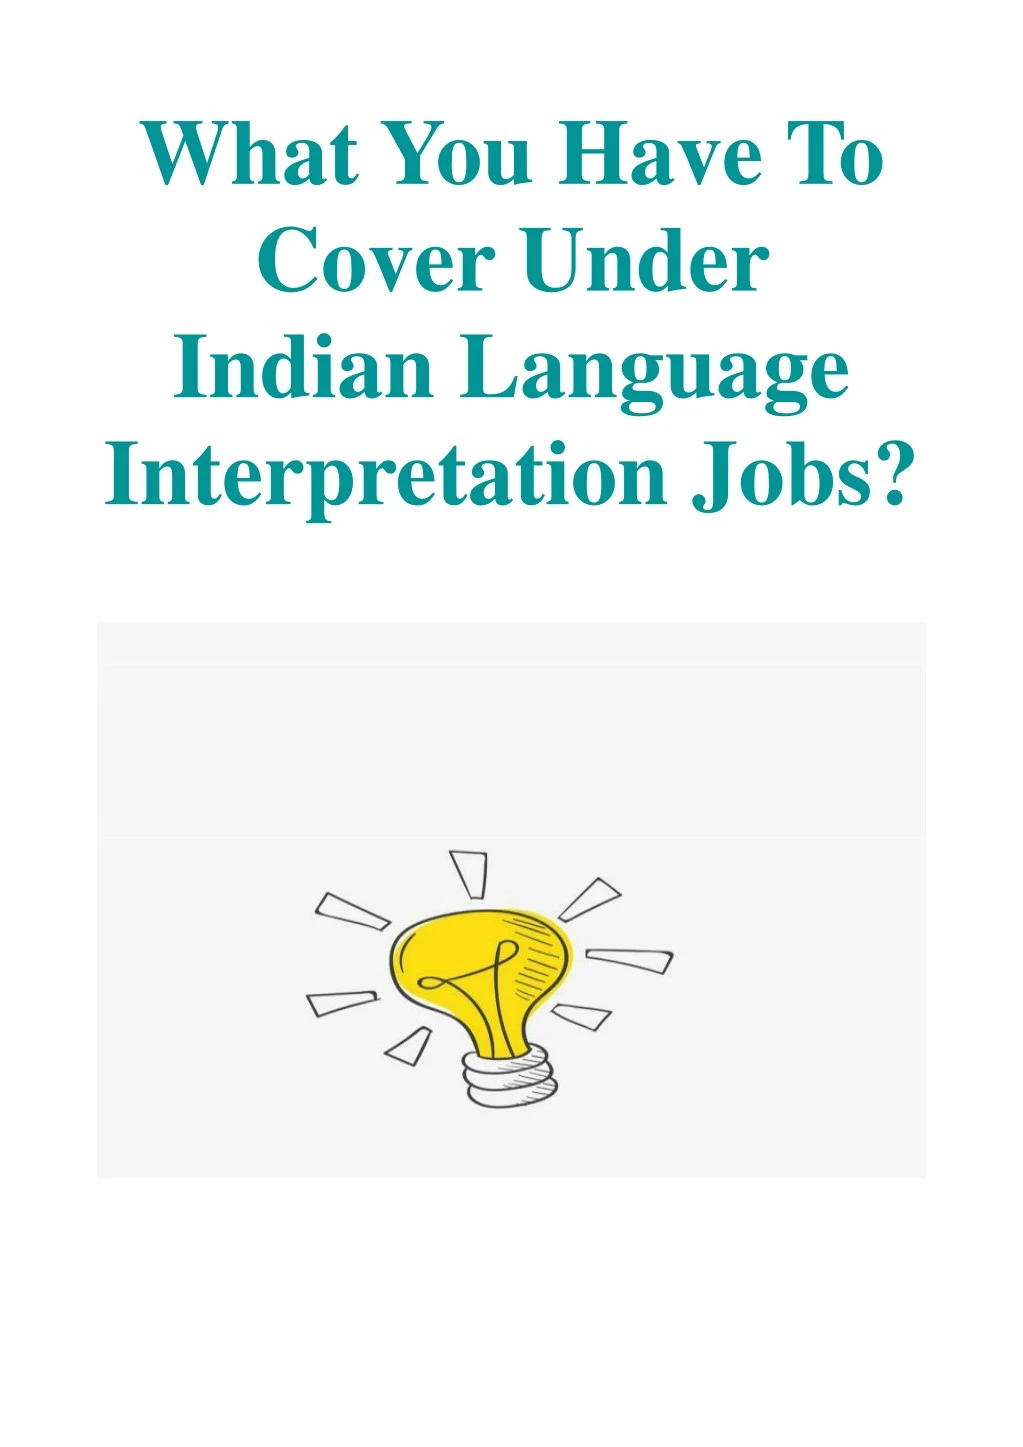 what you have to cover under indian language